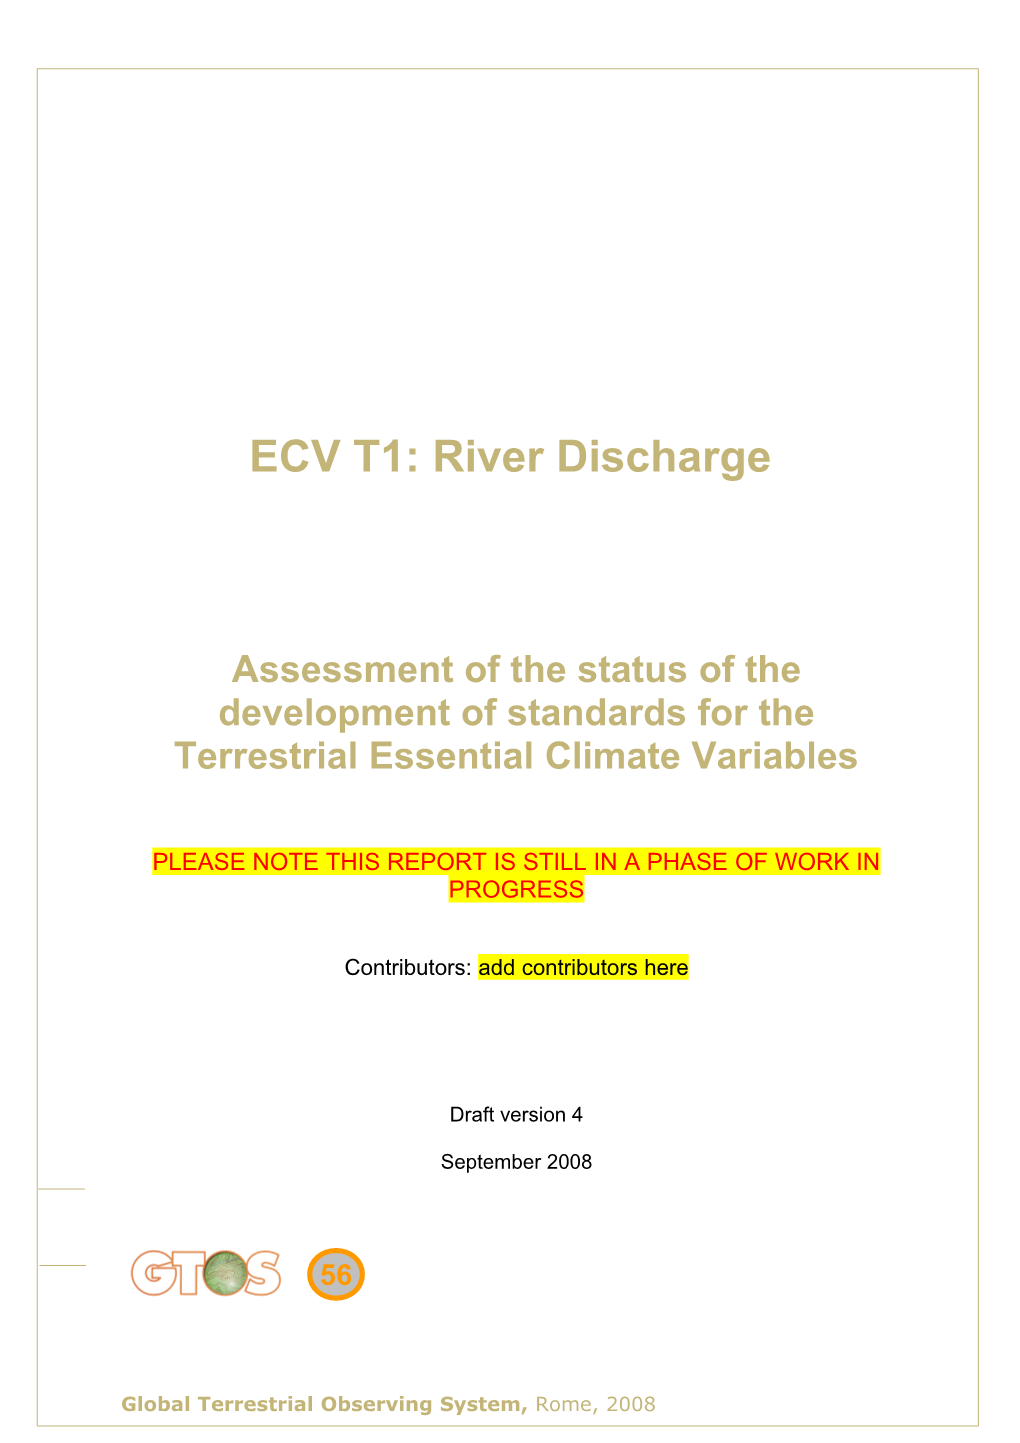 Assessment of the Status of the Development of Standards for the Terrestrial Essential